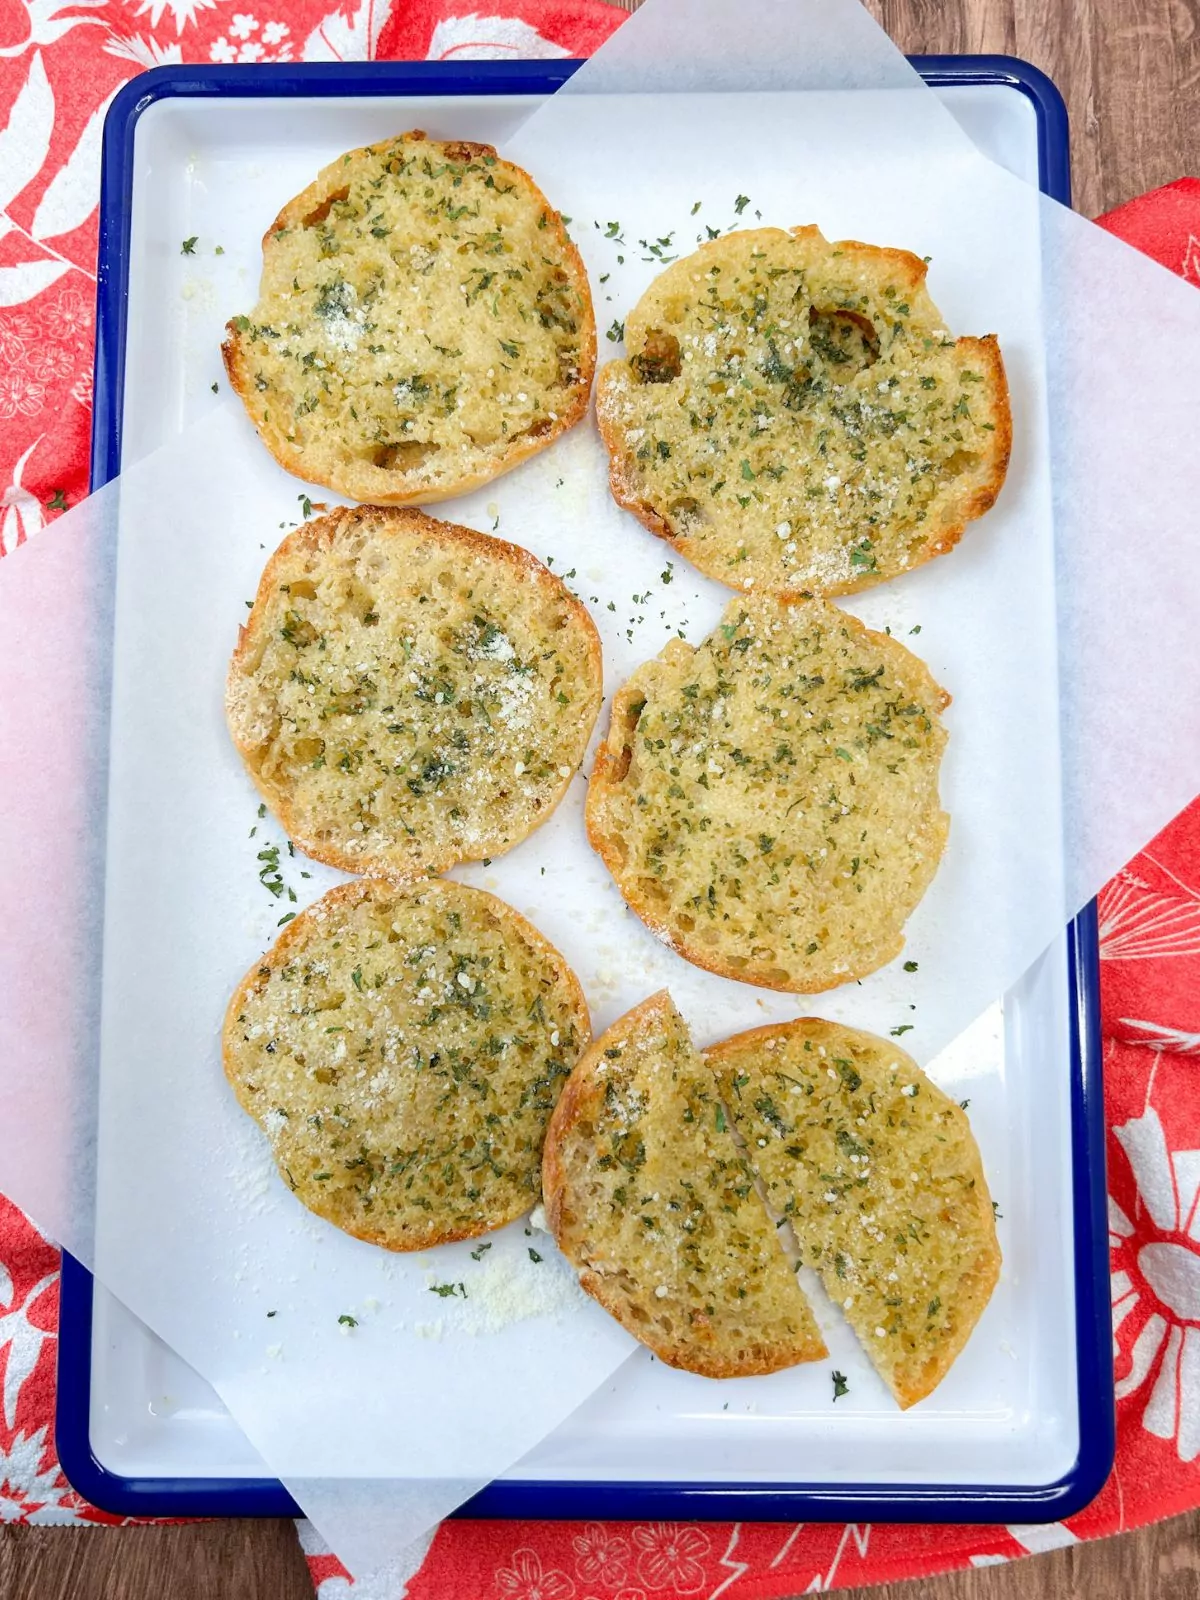 English muffins toasted with homemade garlic butter on white tray and red flowered dish towel.